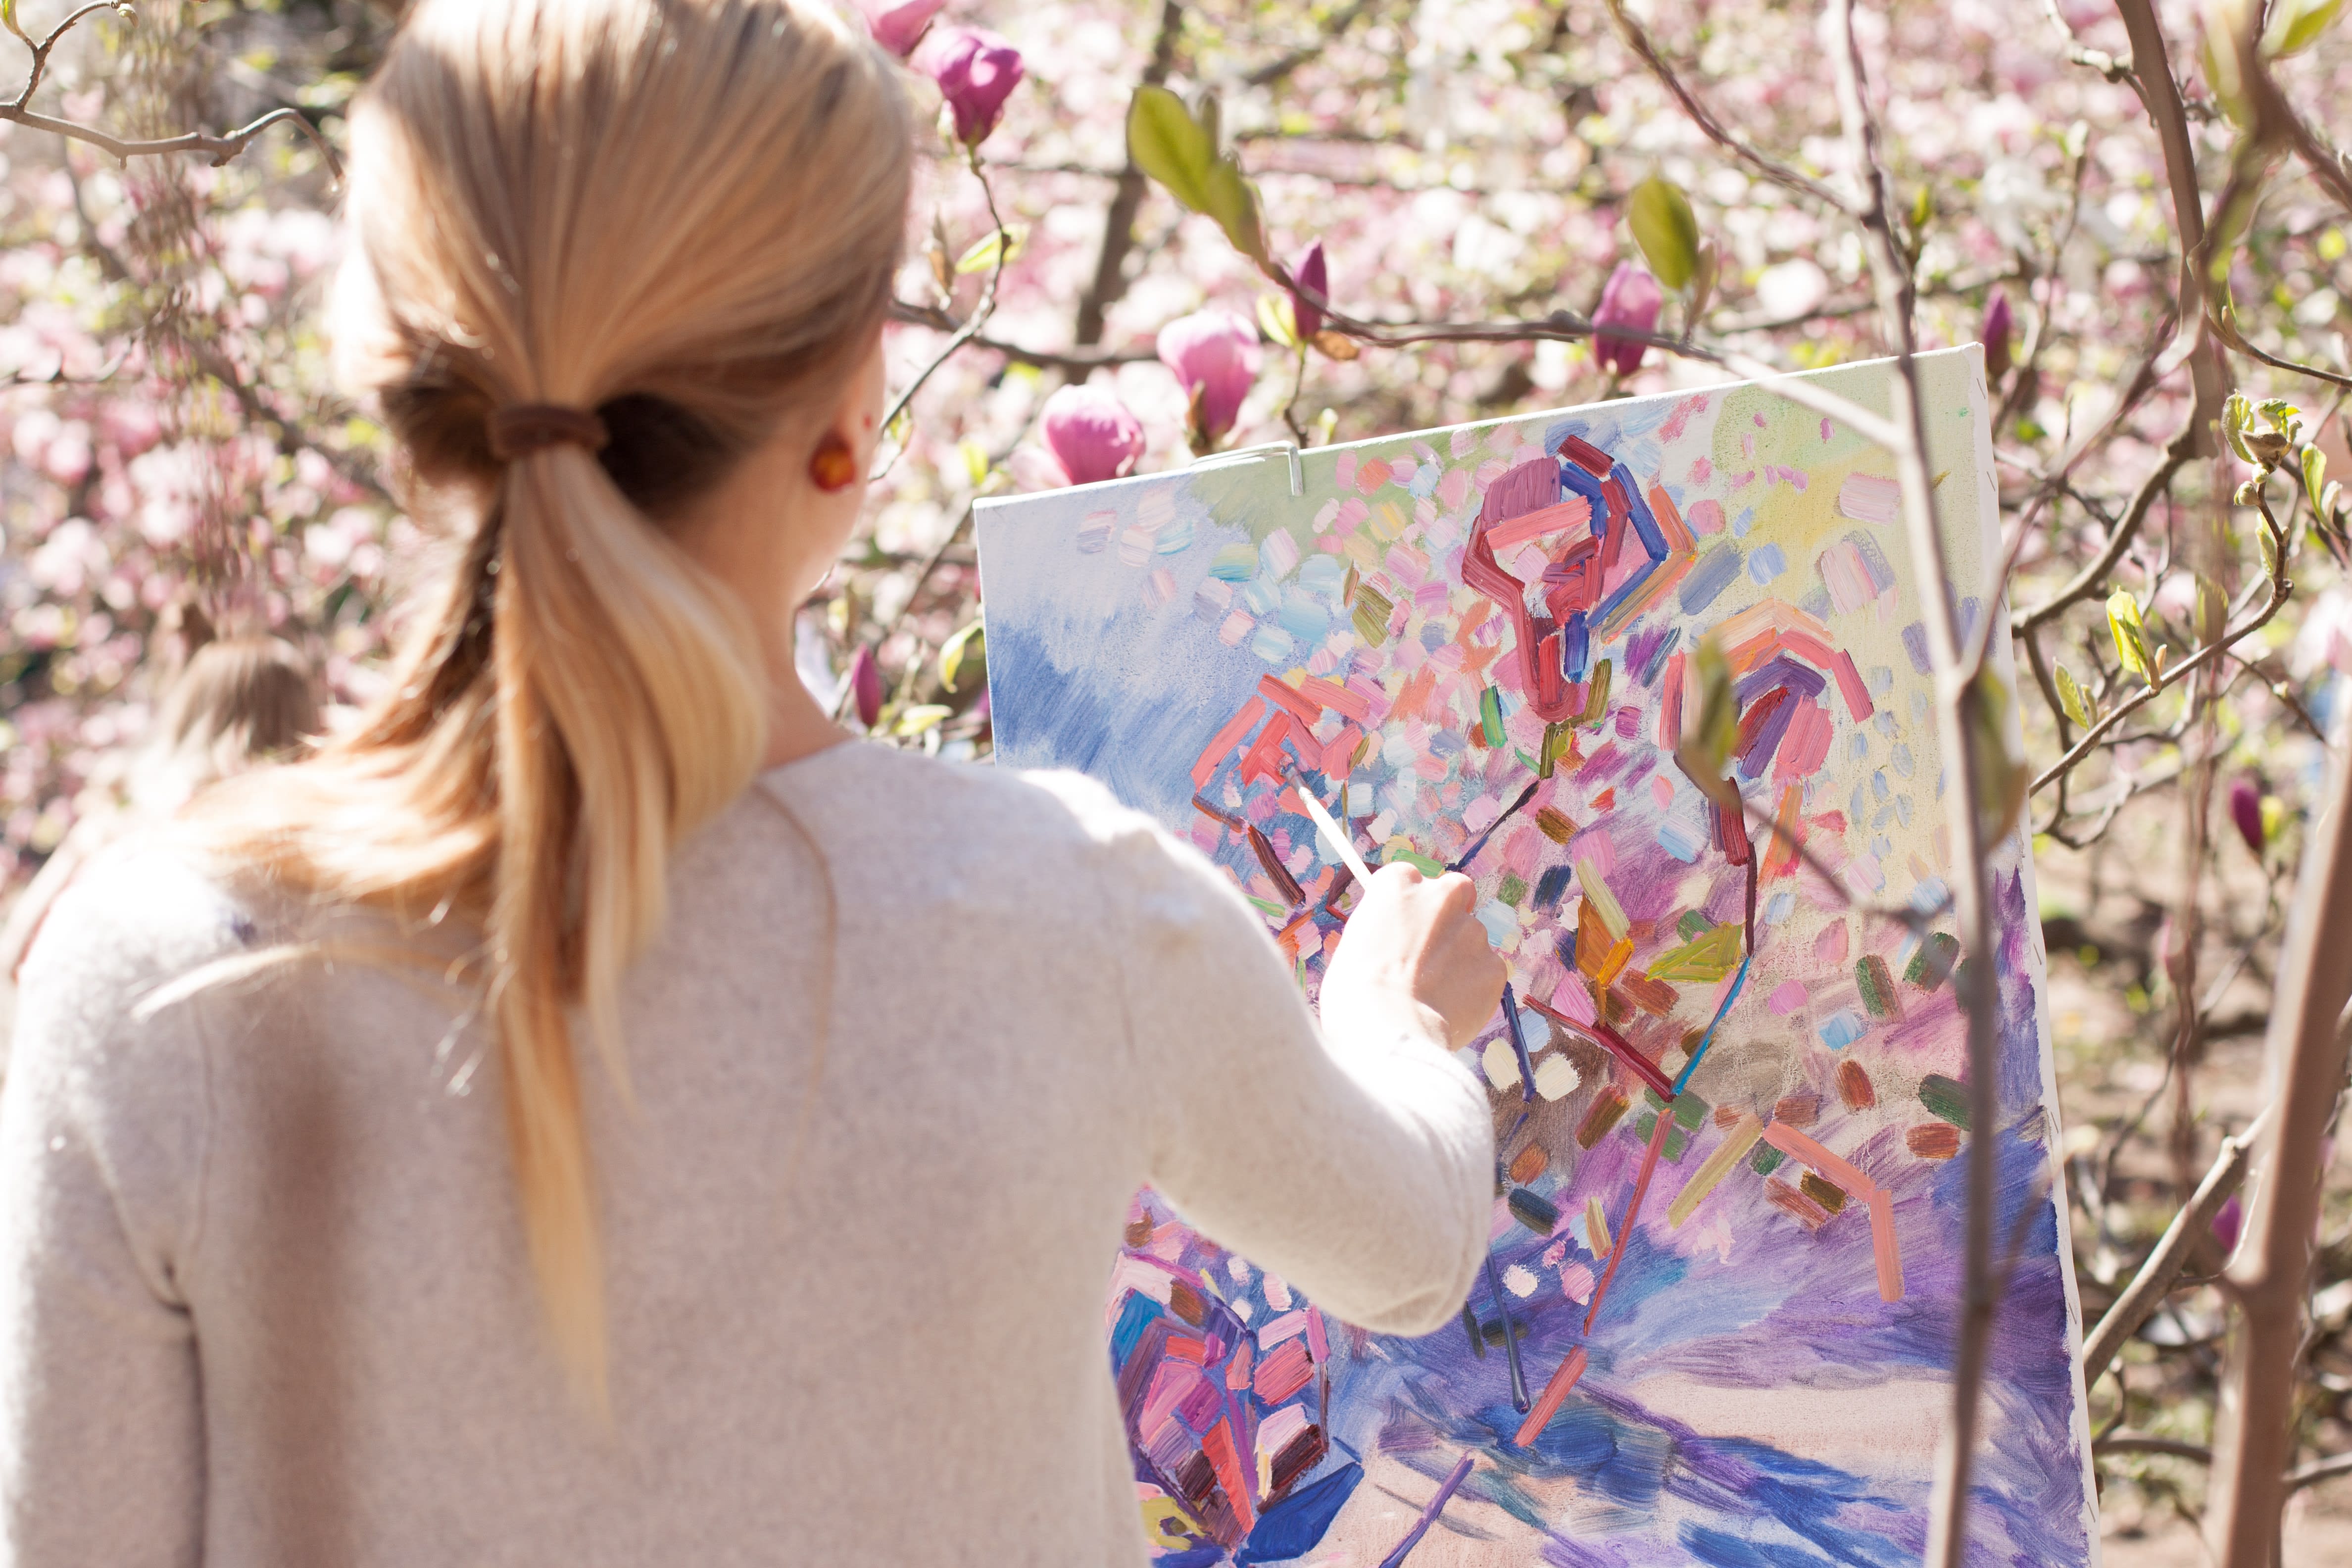 Painter in the botanical garden. Magnolia It would be nice if you can support my Instagram https://www.instagram.com/tanywu4ka/ @tanywu4ka